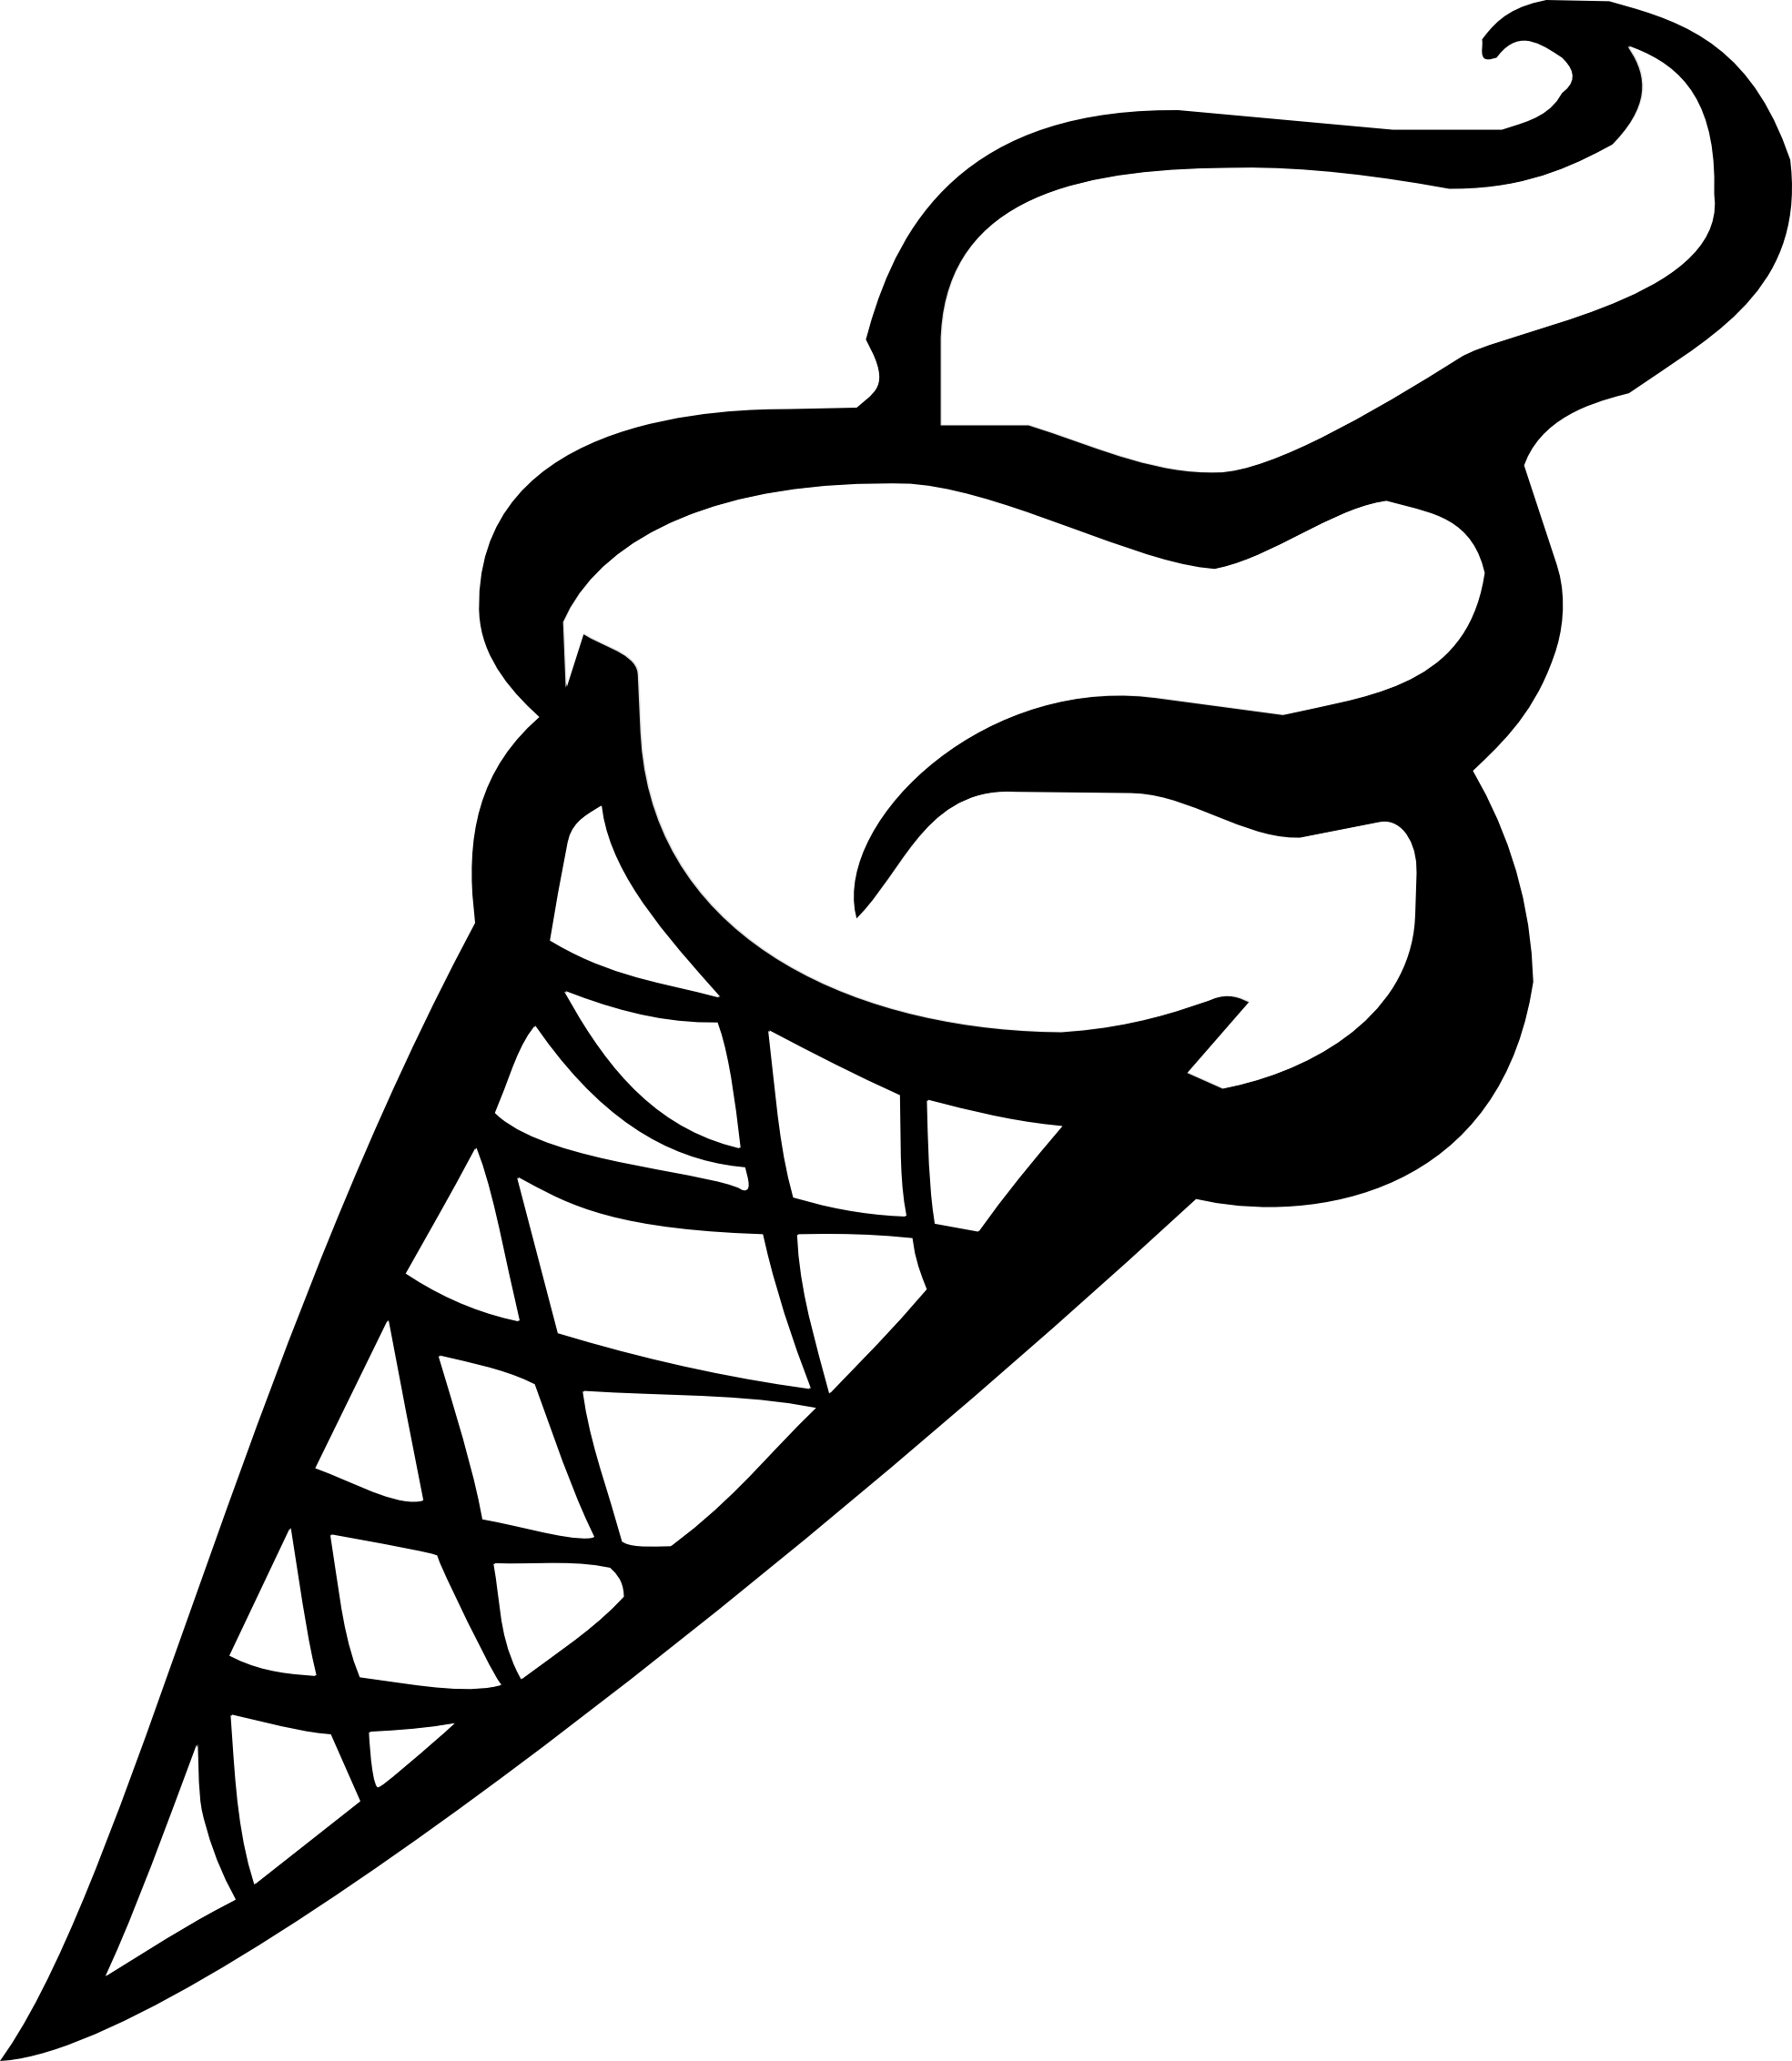 Website clipart black and white. Ice cream cup clip